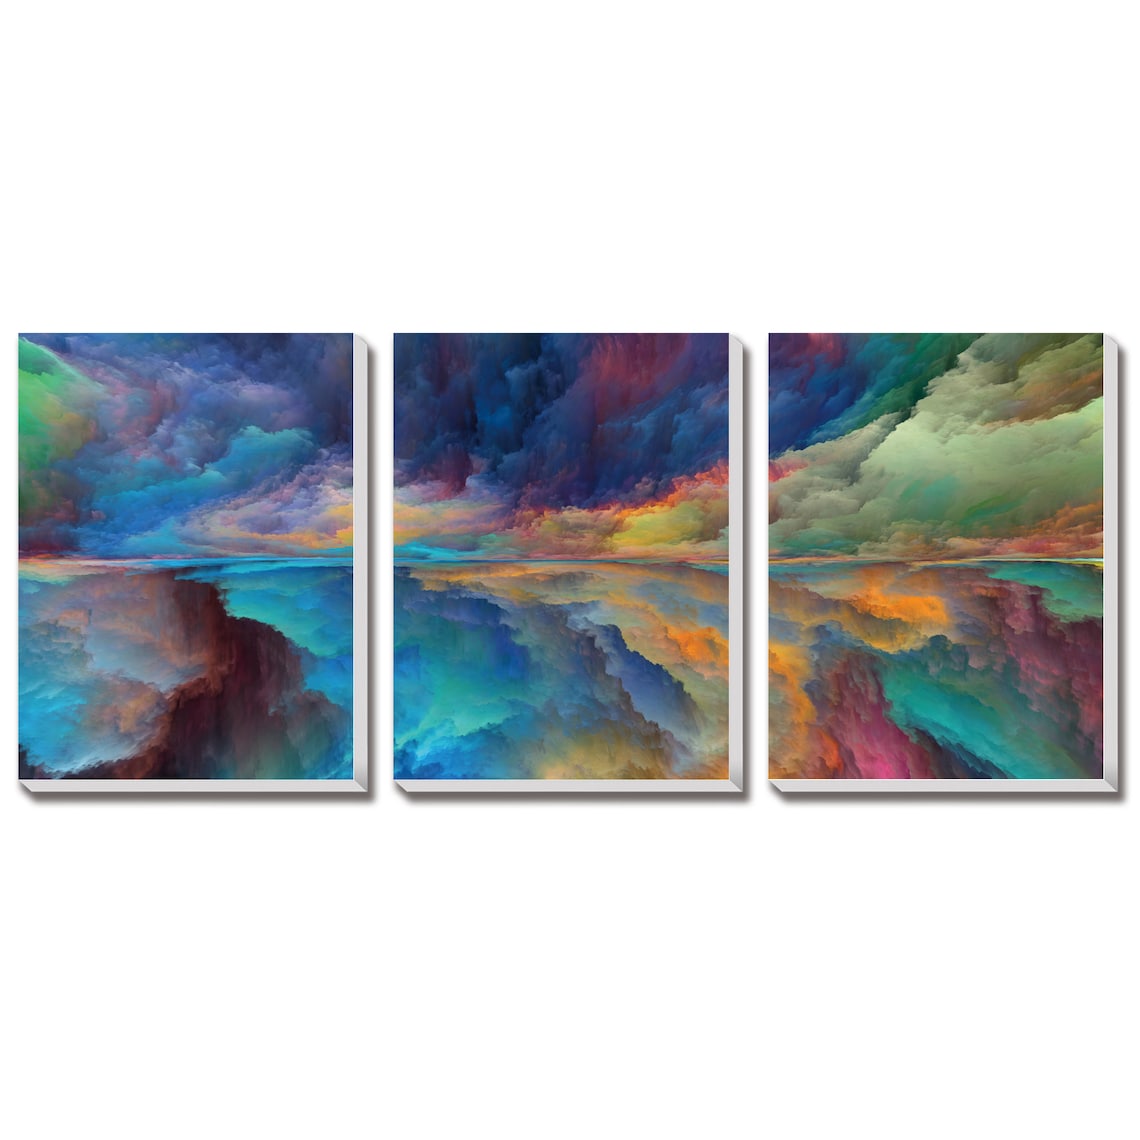 Abstract Cloud Storm (Blue Tone) Fantastic Landscape Canvas Wall Art, Vivid Color Oil Painting for Wall Decor, Set of 3 Panels or 1 Panorama View